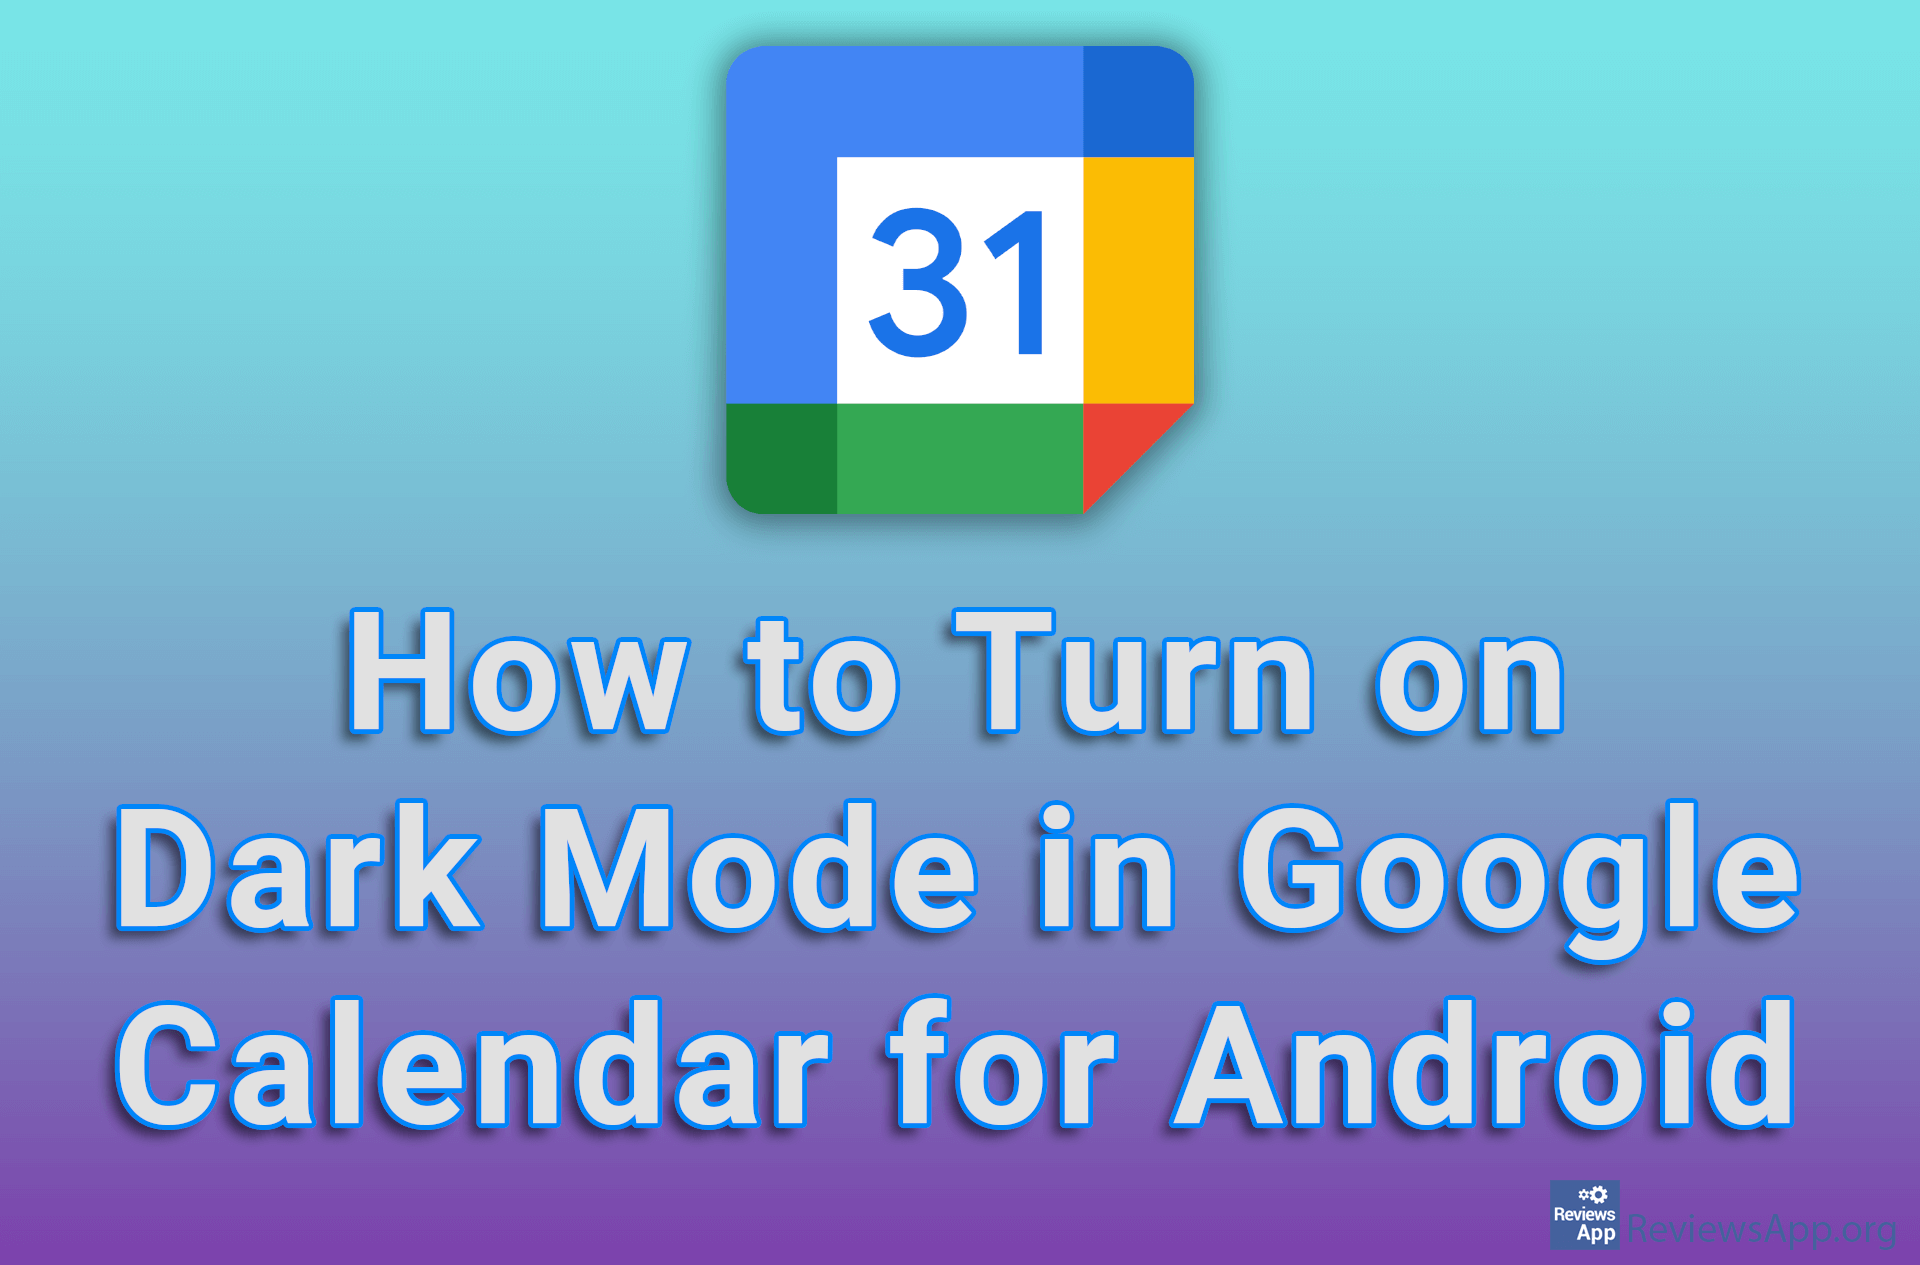 How to Turn on Dark Mode in Google Calendar for Android ‐ Reviews App